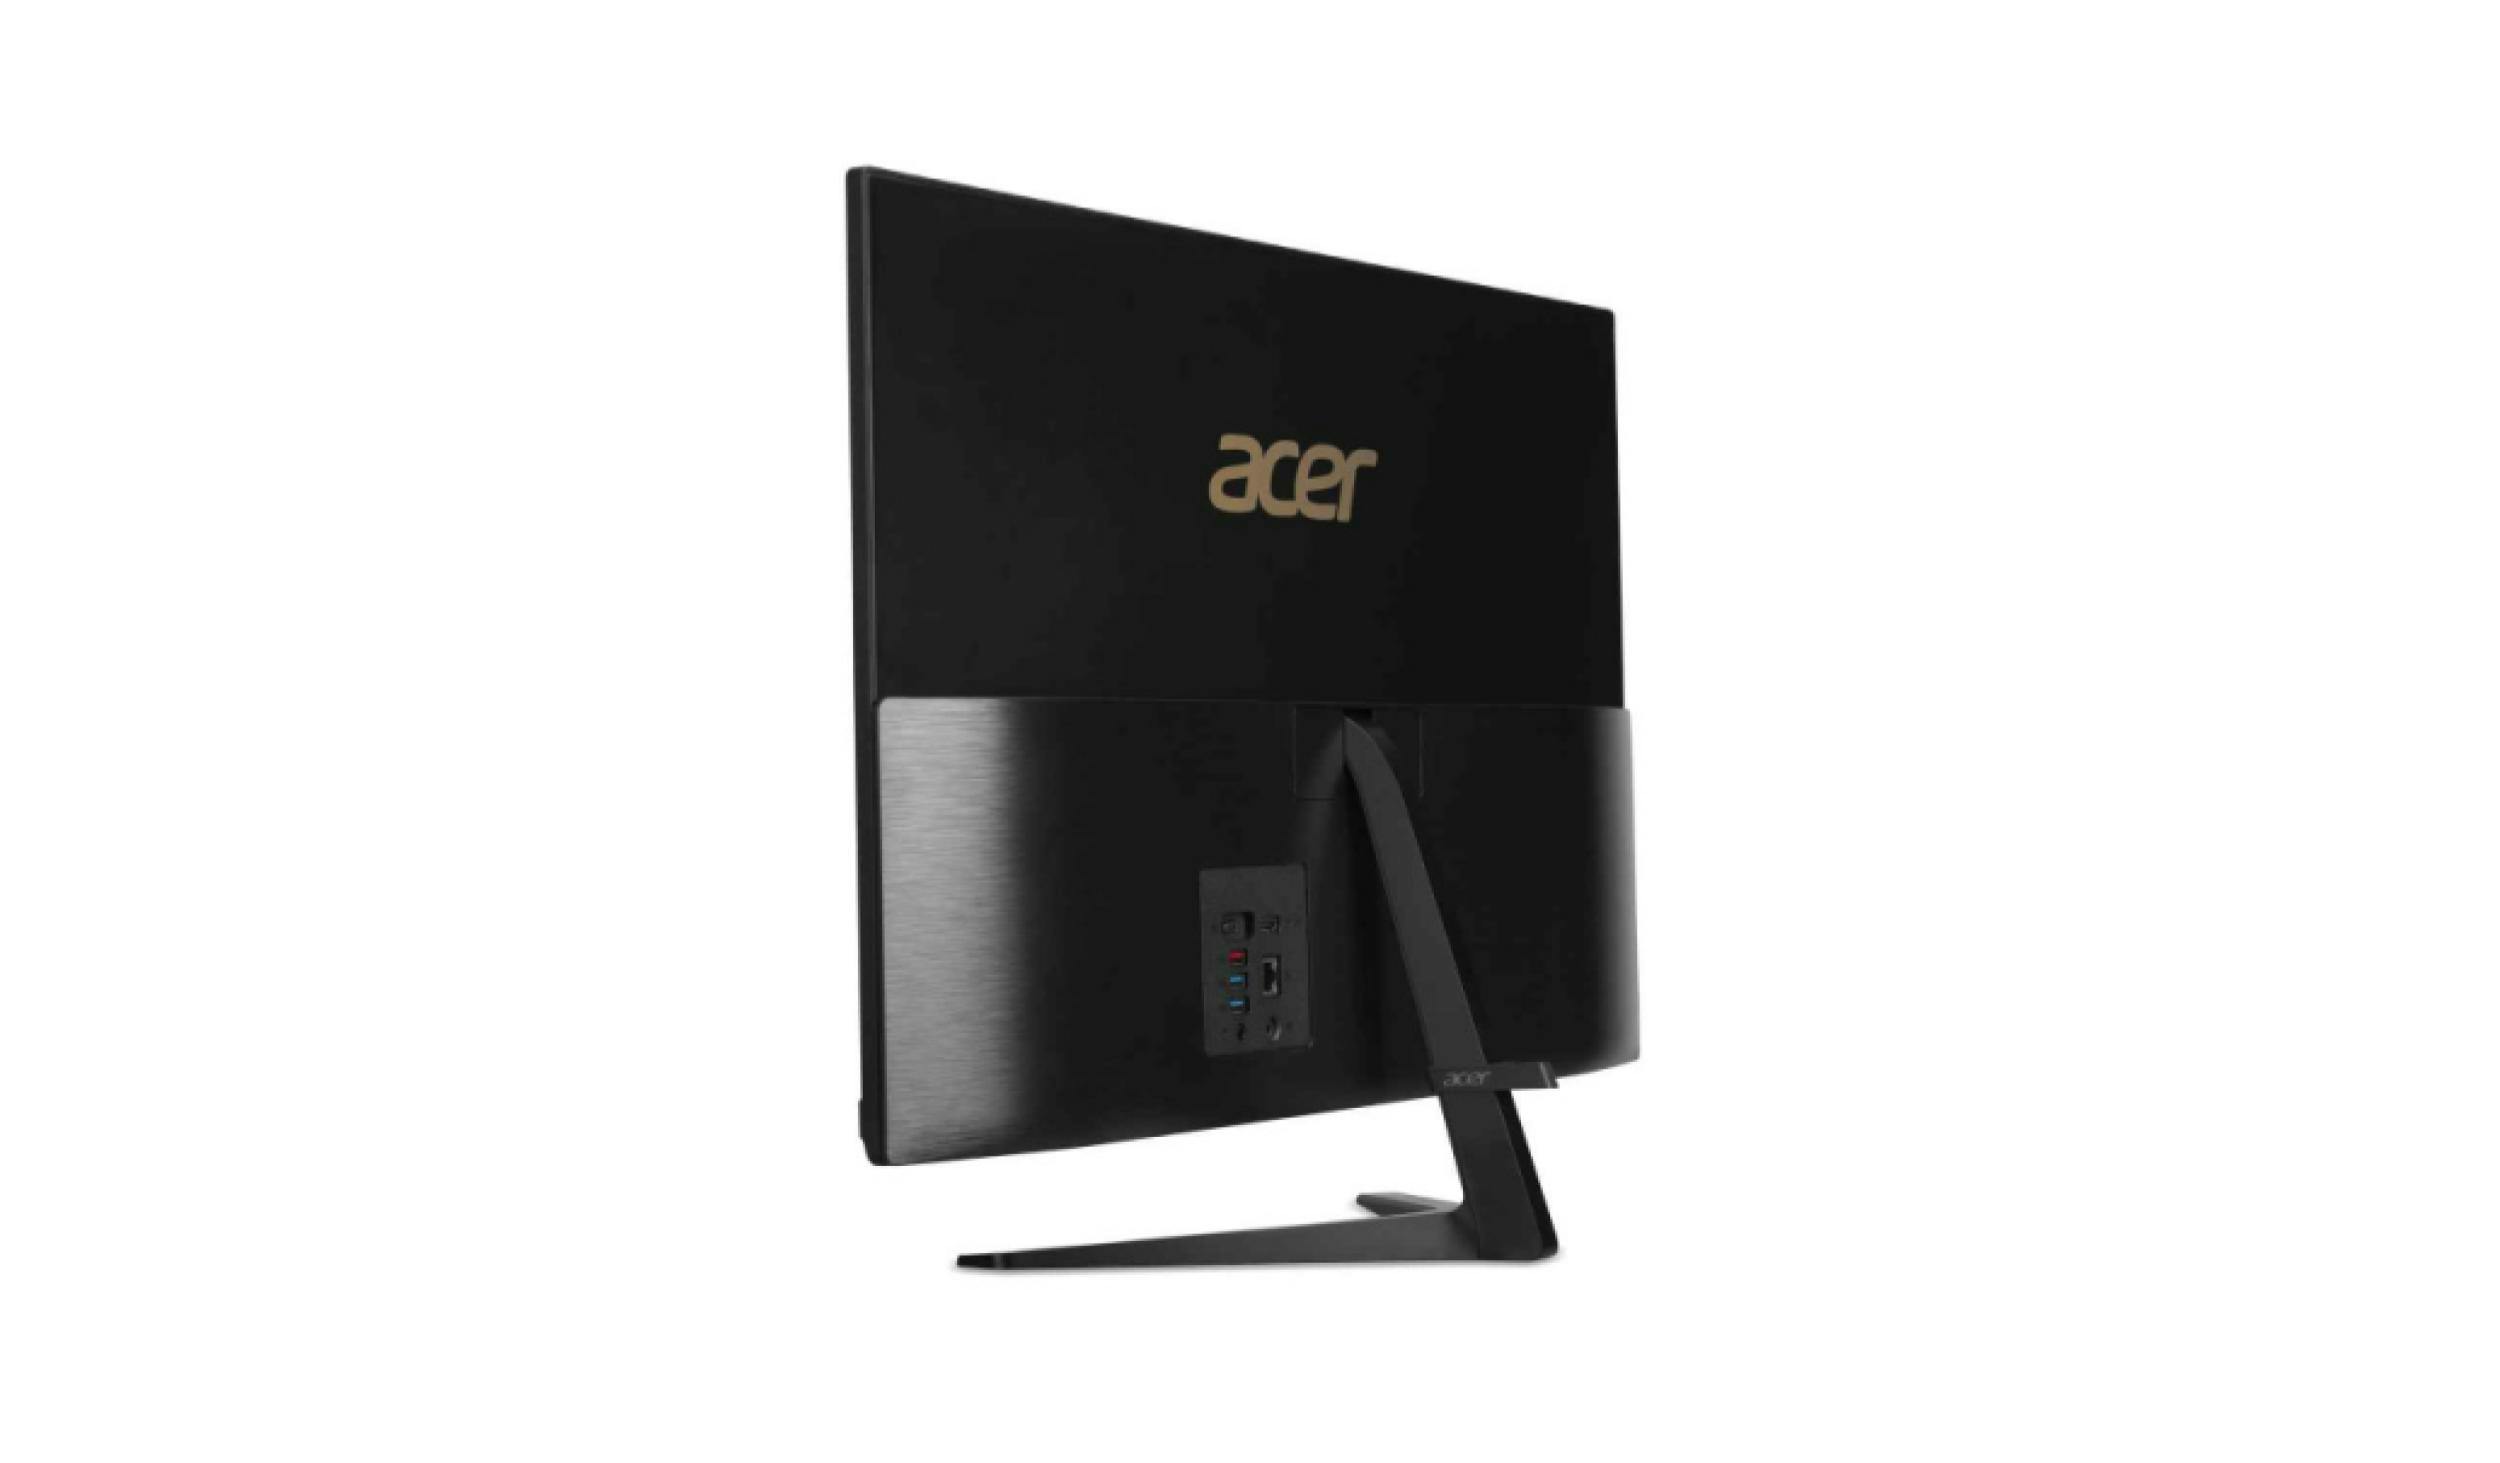 Buy ACER Aspire C24-1800 23.8 All-in-One PC - Intel® Core™ i5, 512 GB SSD,  Black